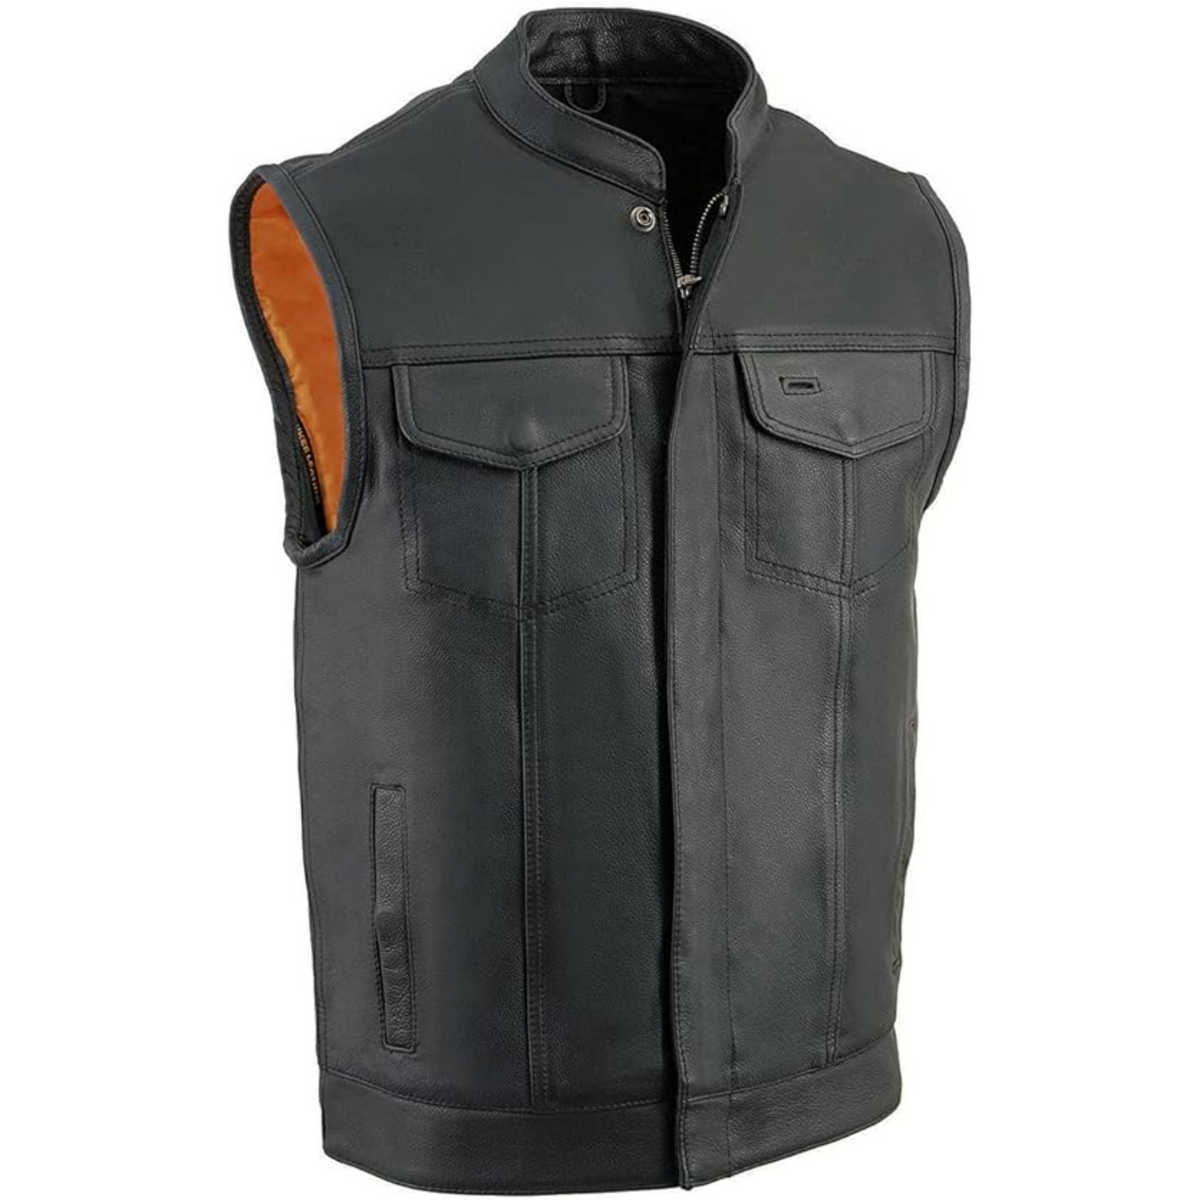 Exclusive Motorbike Racers Club Vest Superior Quality Gear for Passionate Racing Enthusiasts